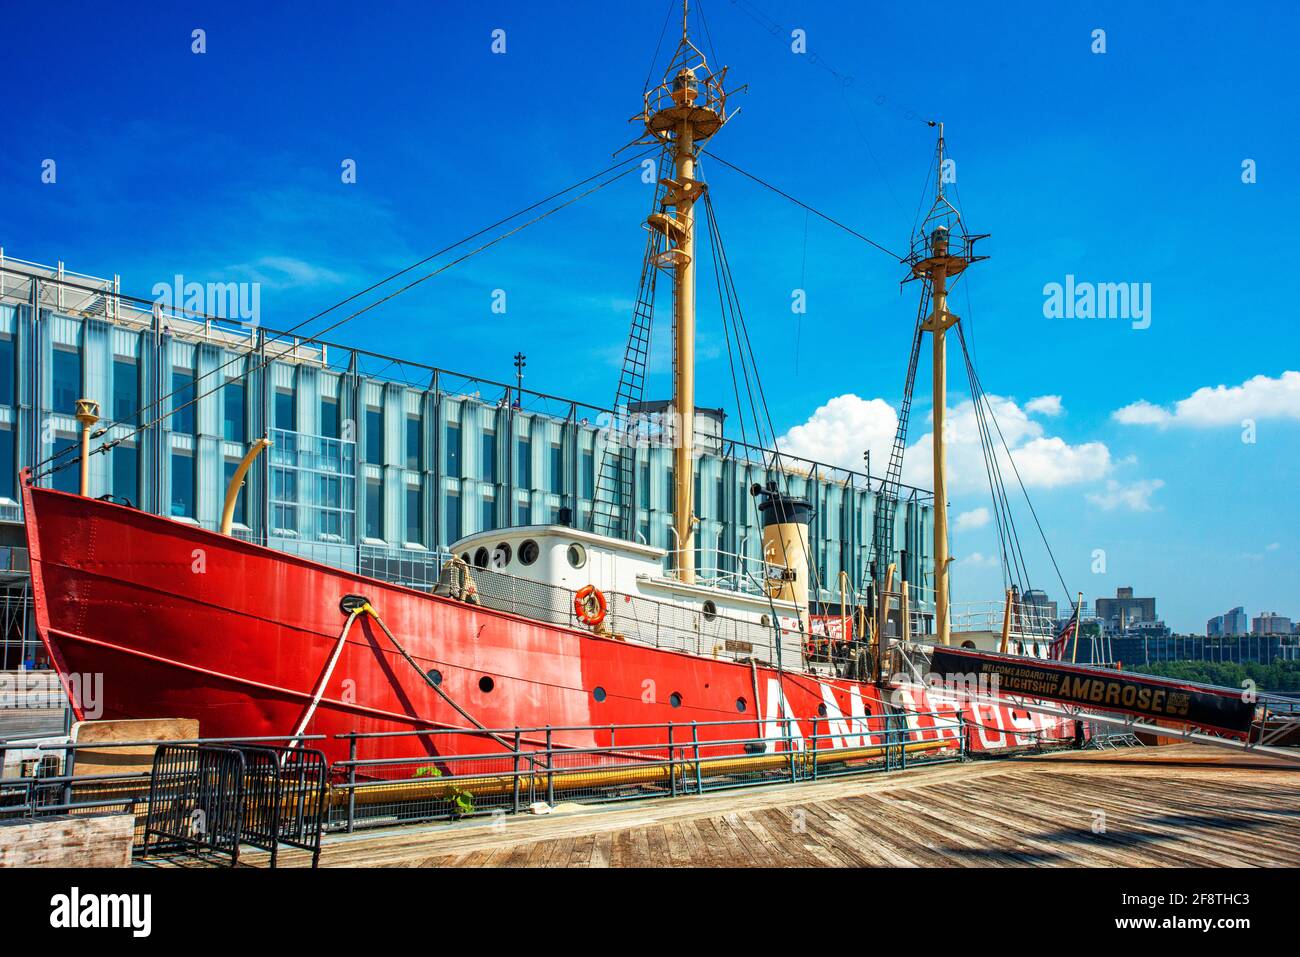 Pier 16 and Ambrose ship. Harbour South Street Seaport district, Lower Manhattan, New York City, NY, USA Stock Photo